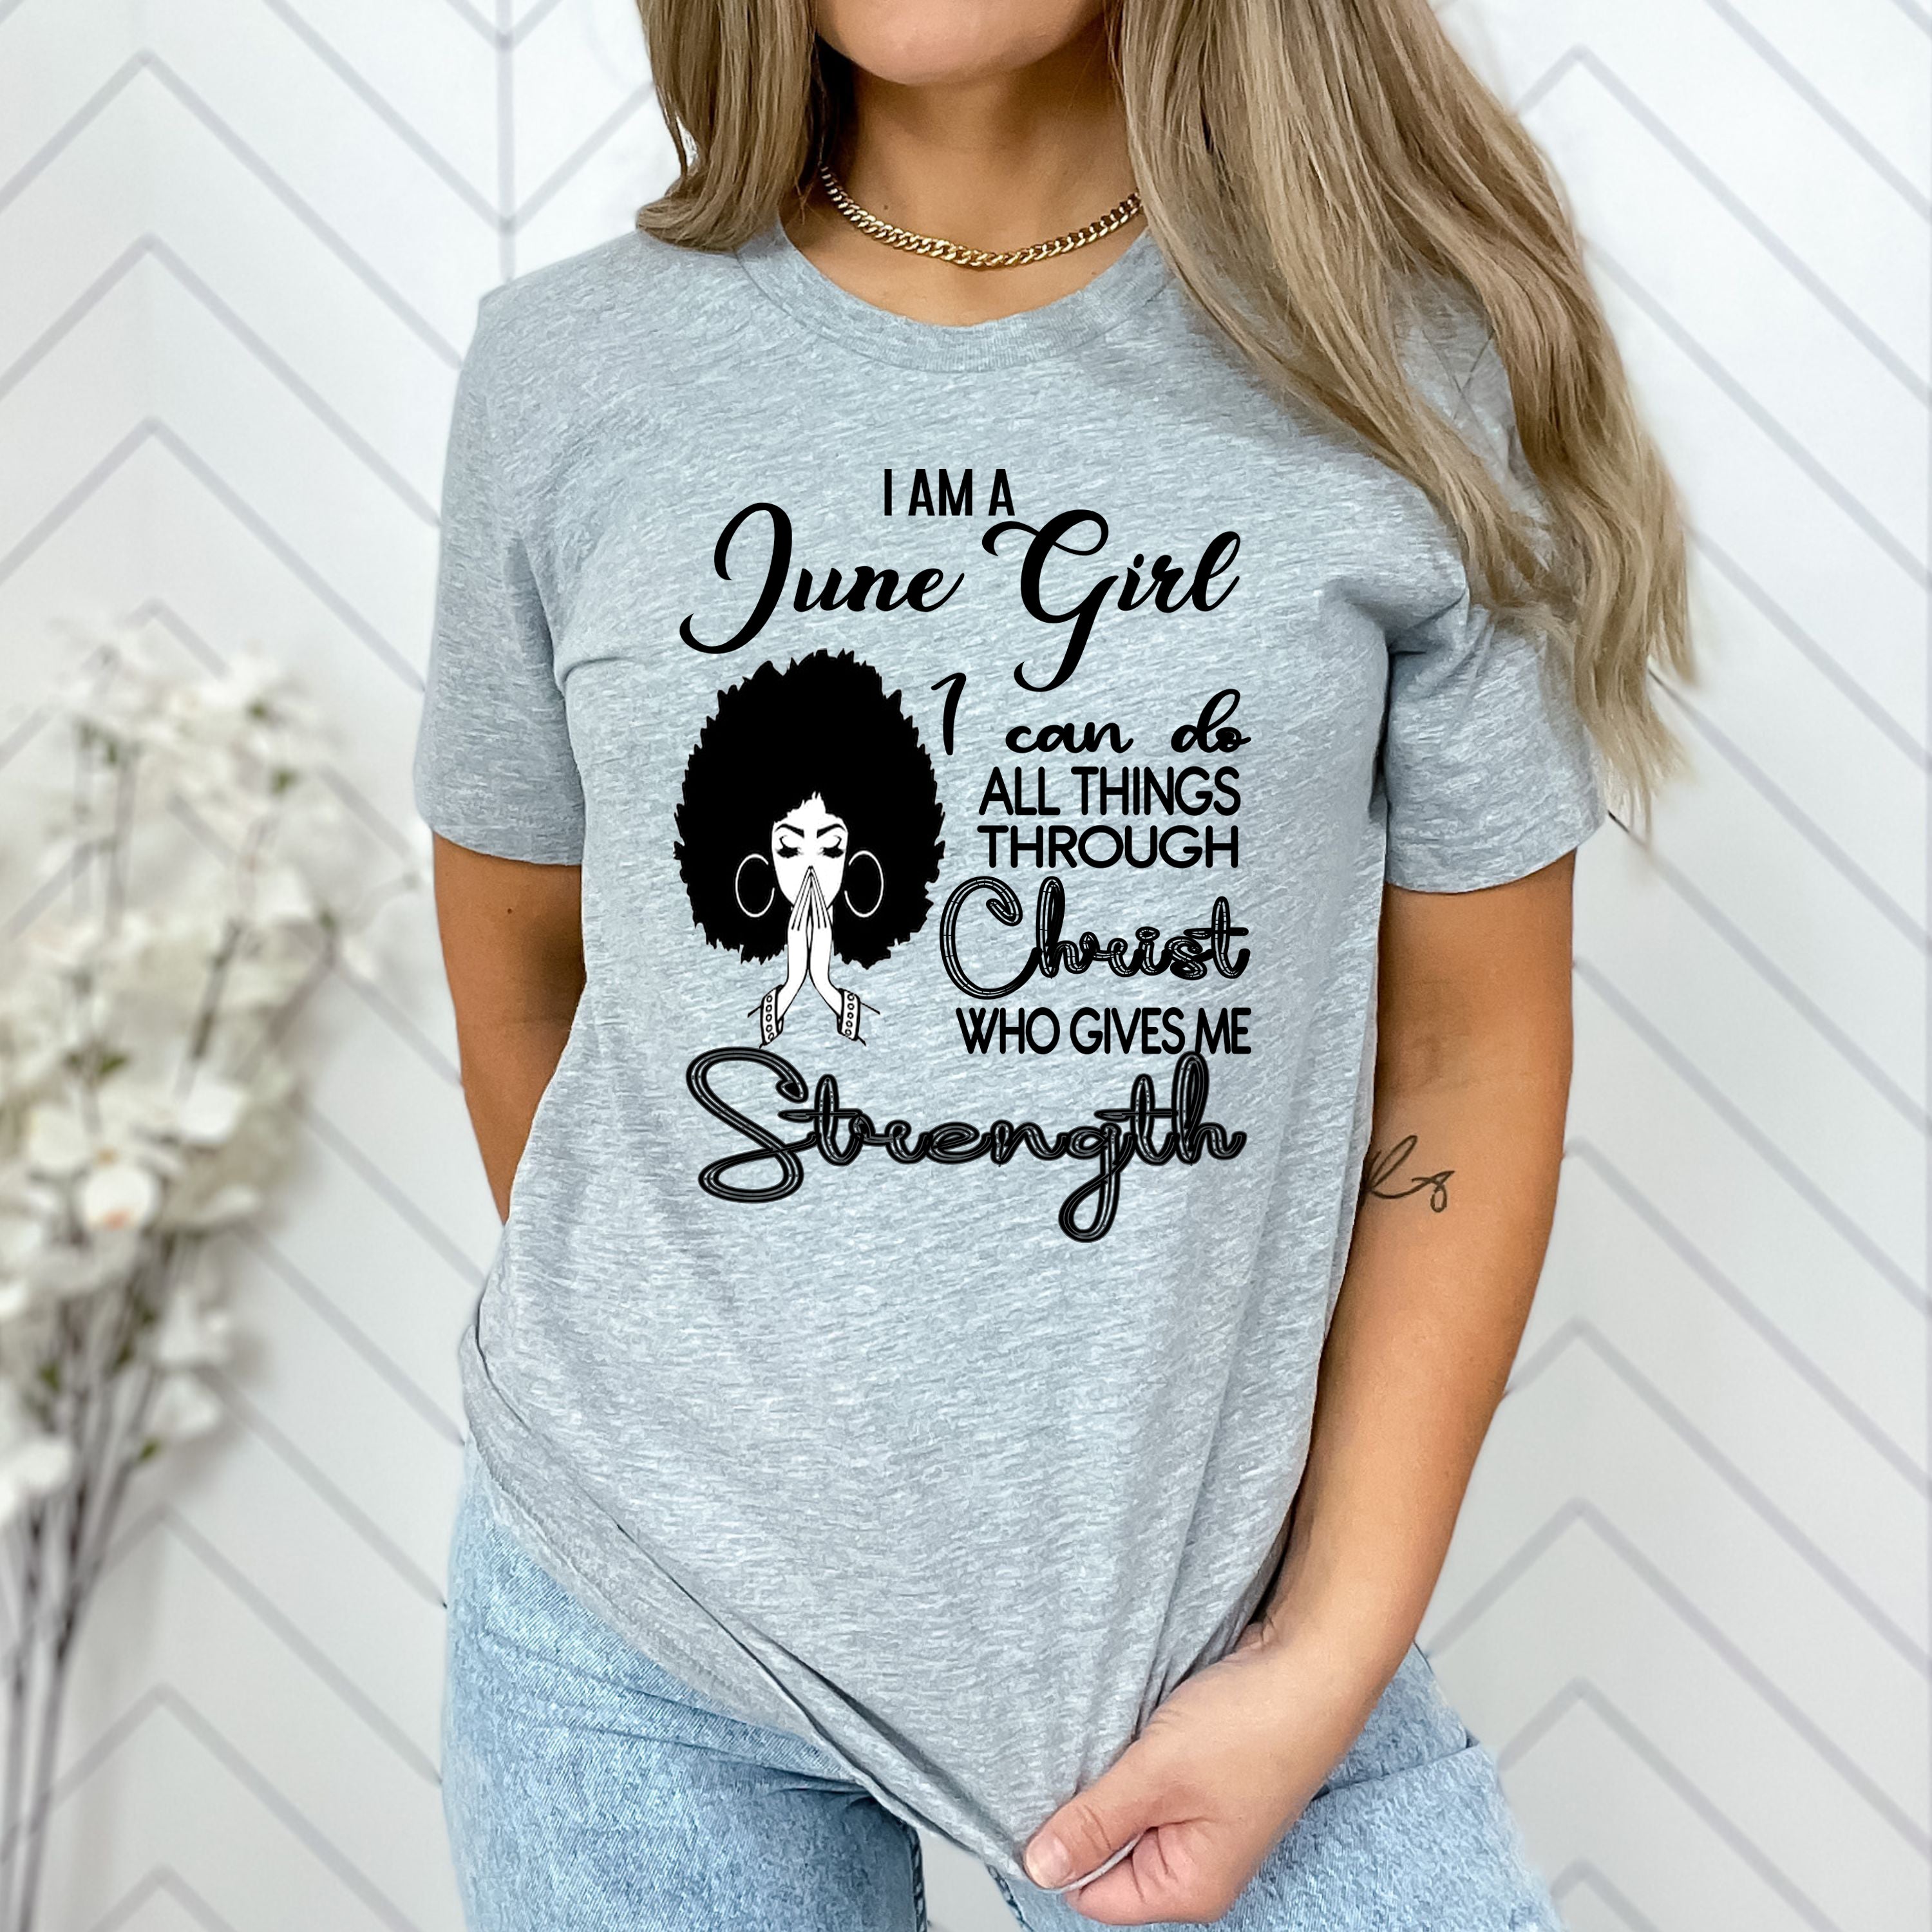 "JUNE GIRL Can Do All Things Through Christ Who Gives Me Strength",T-Shirt.